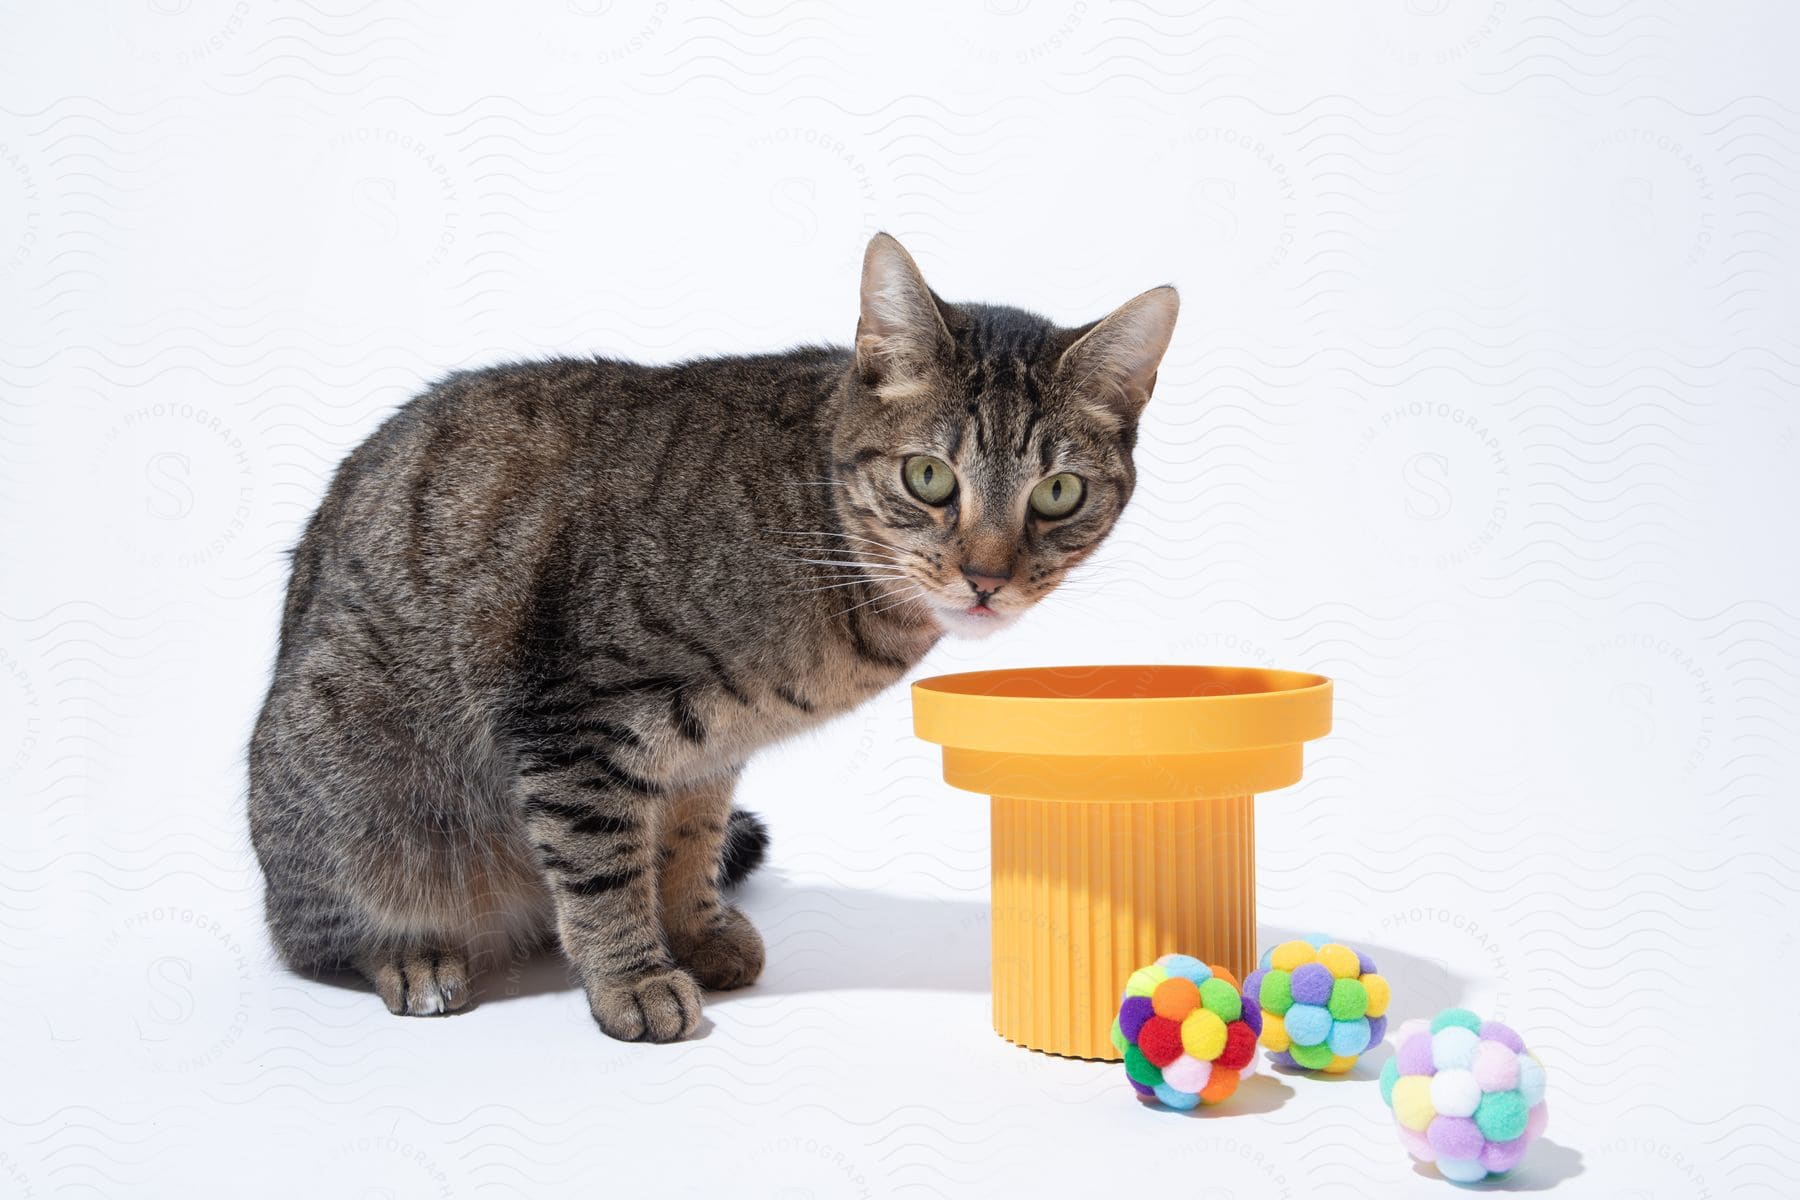 A cat sitting next to some toys inside of a house.